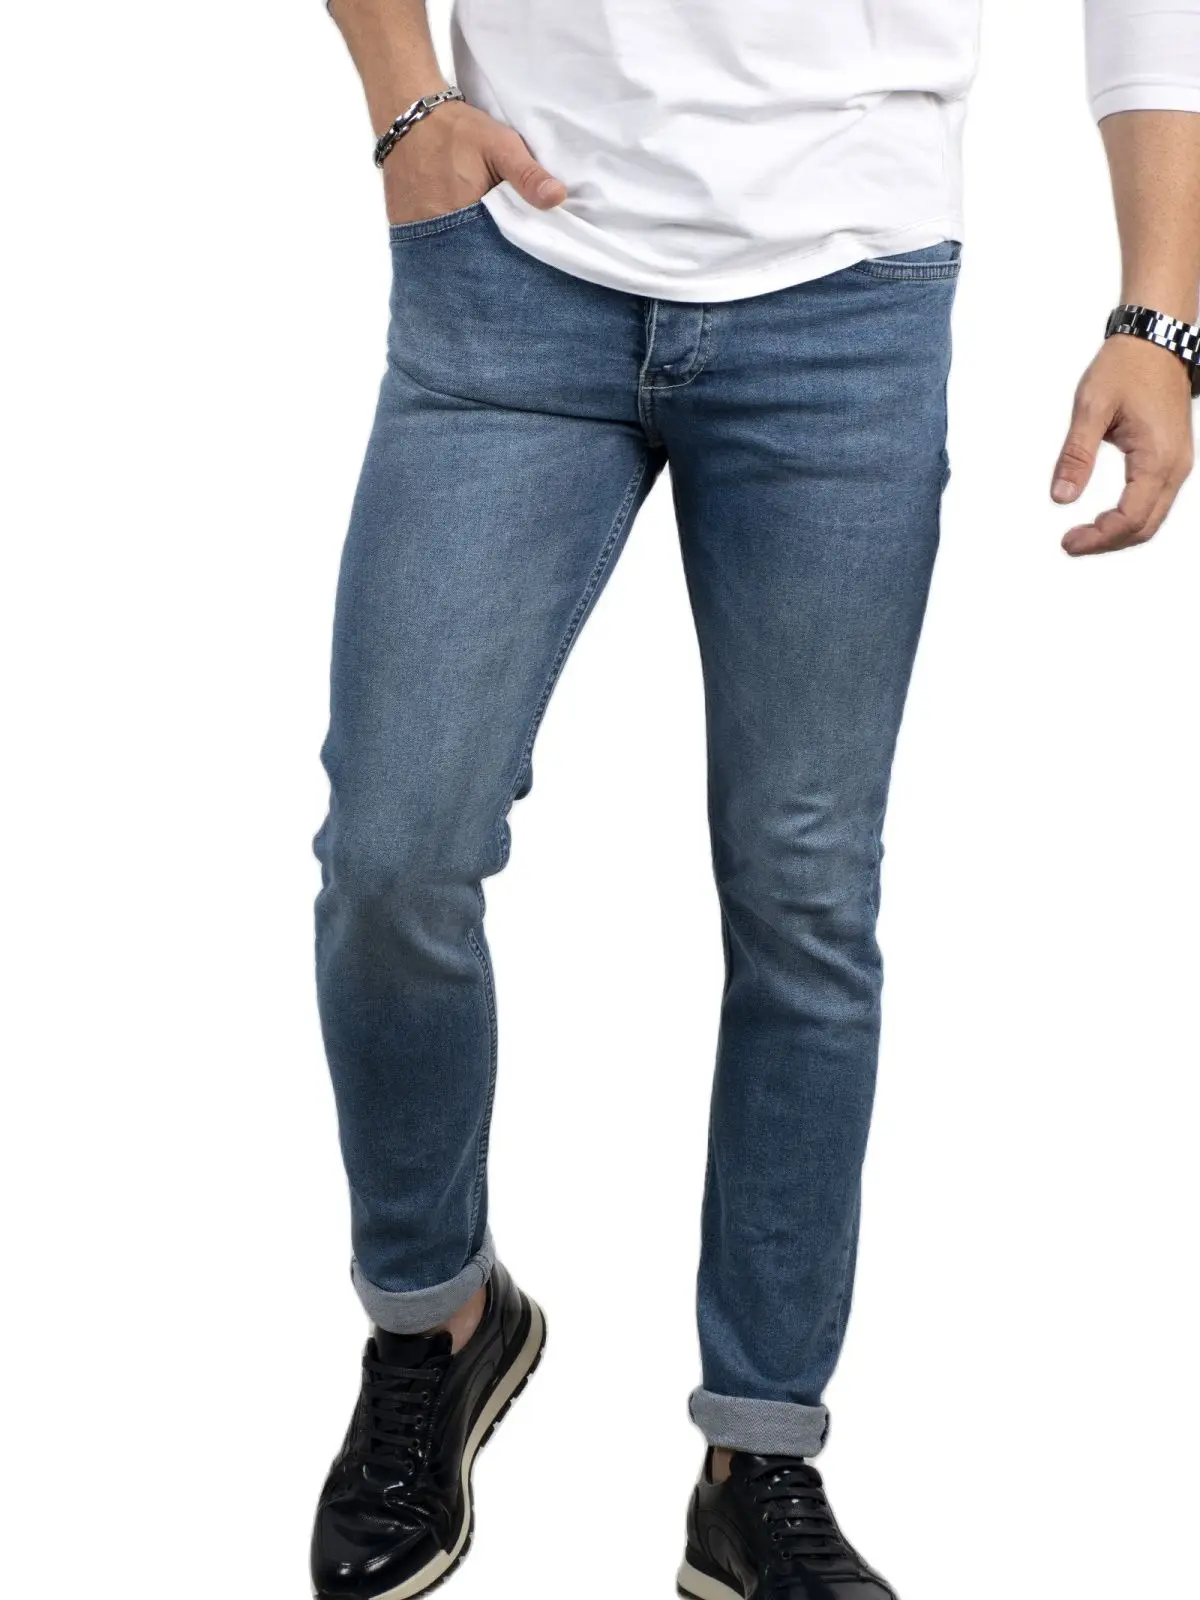 

DeepSEA Male Jeans Pants Slim Fit Cotton Denim Lycra High Quality Mid Waist Tight Bell-Bottomed Casual Business Four Seasons 2002139